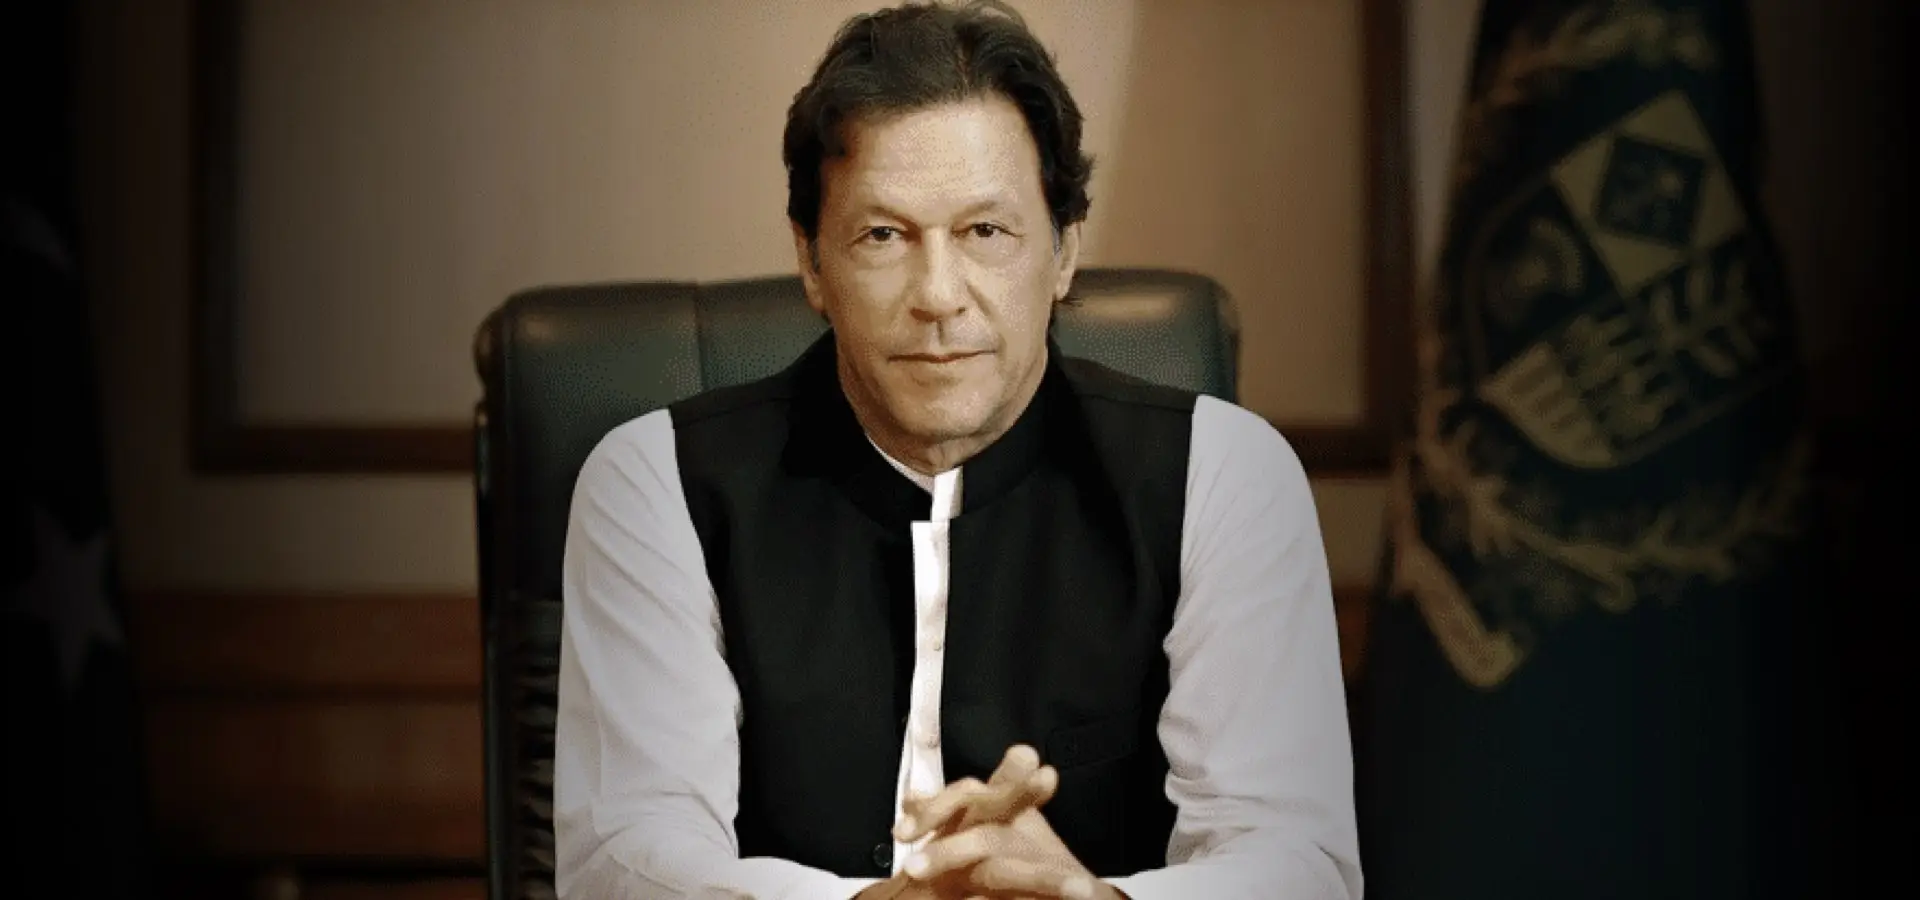 ‎Former Pakistan PM Imran Khan Given Three-Year Jail in Corruption Trial